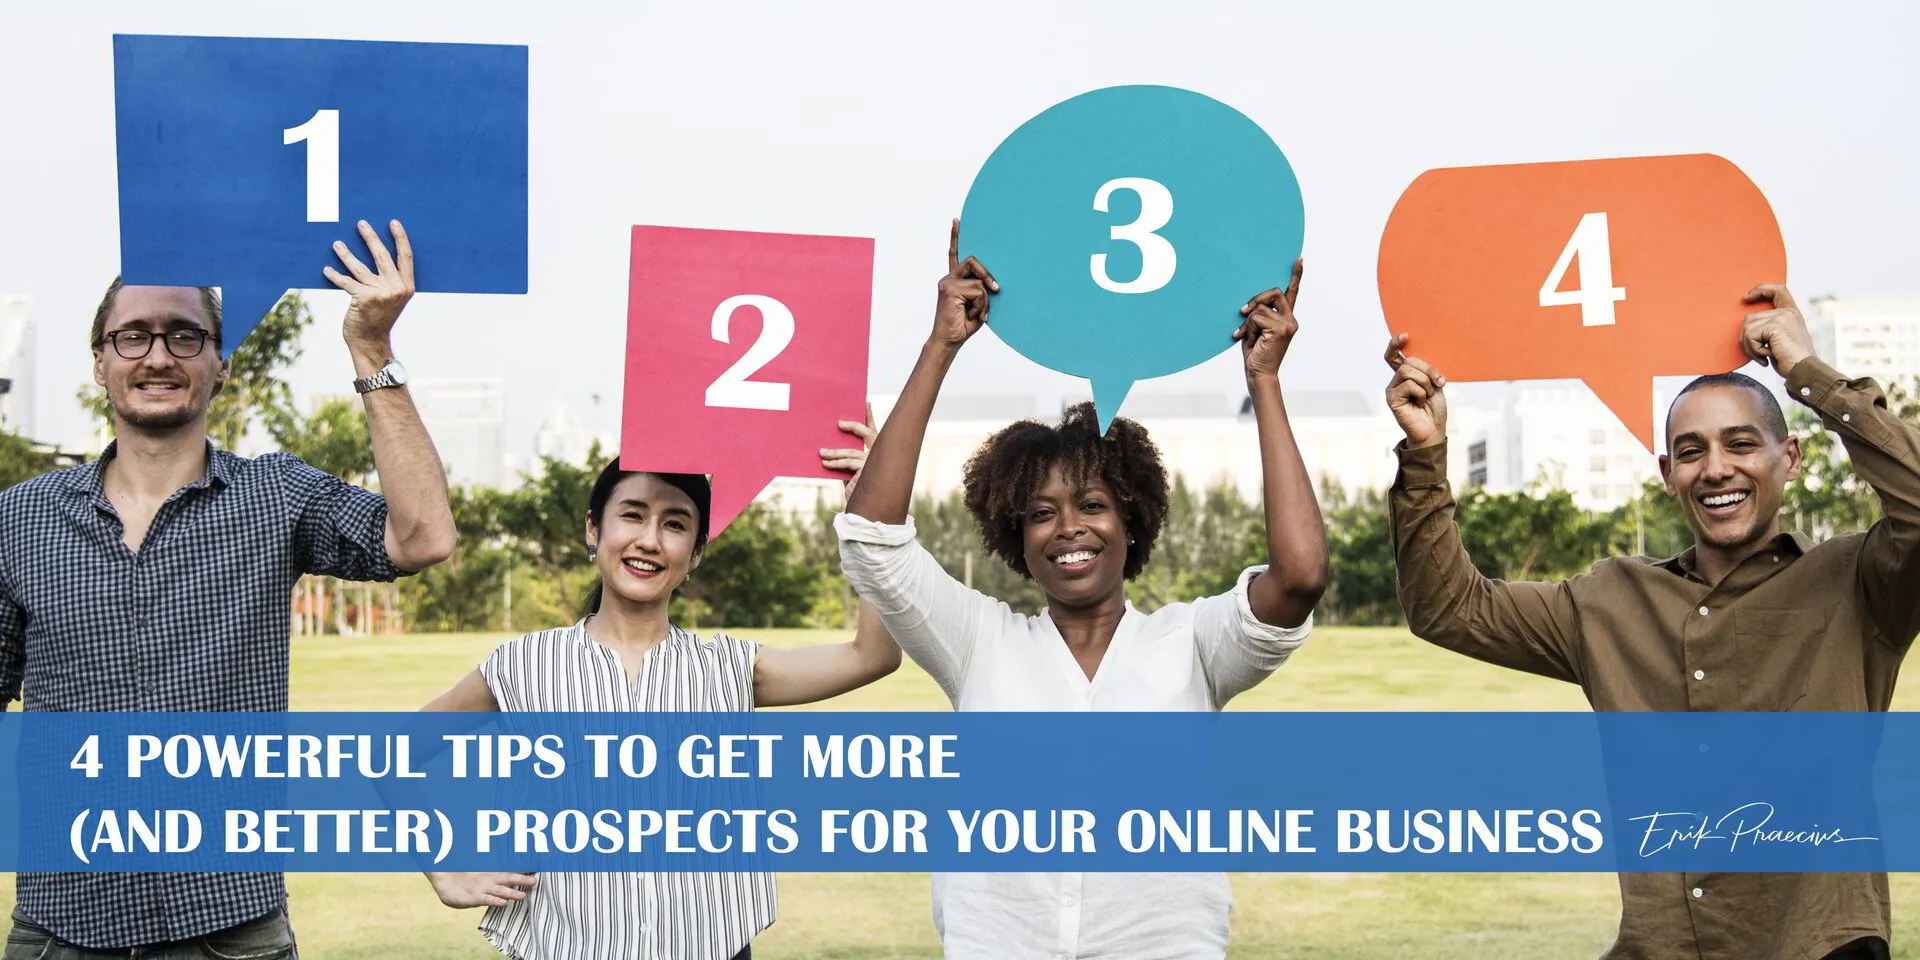 4 Powerful Tips to get More (AND BETTER) Prospects for Your Online Business